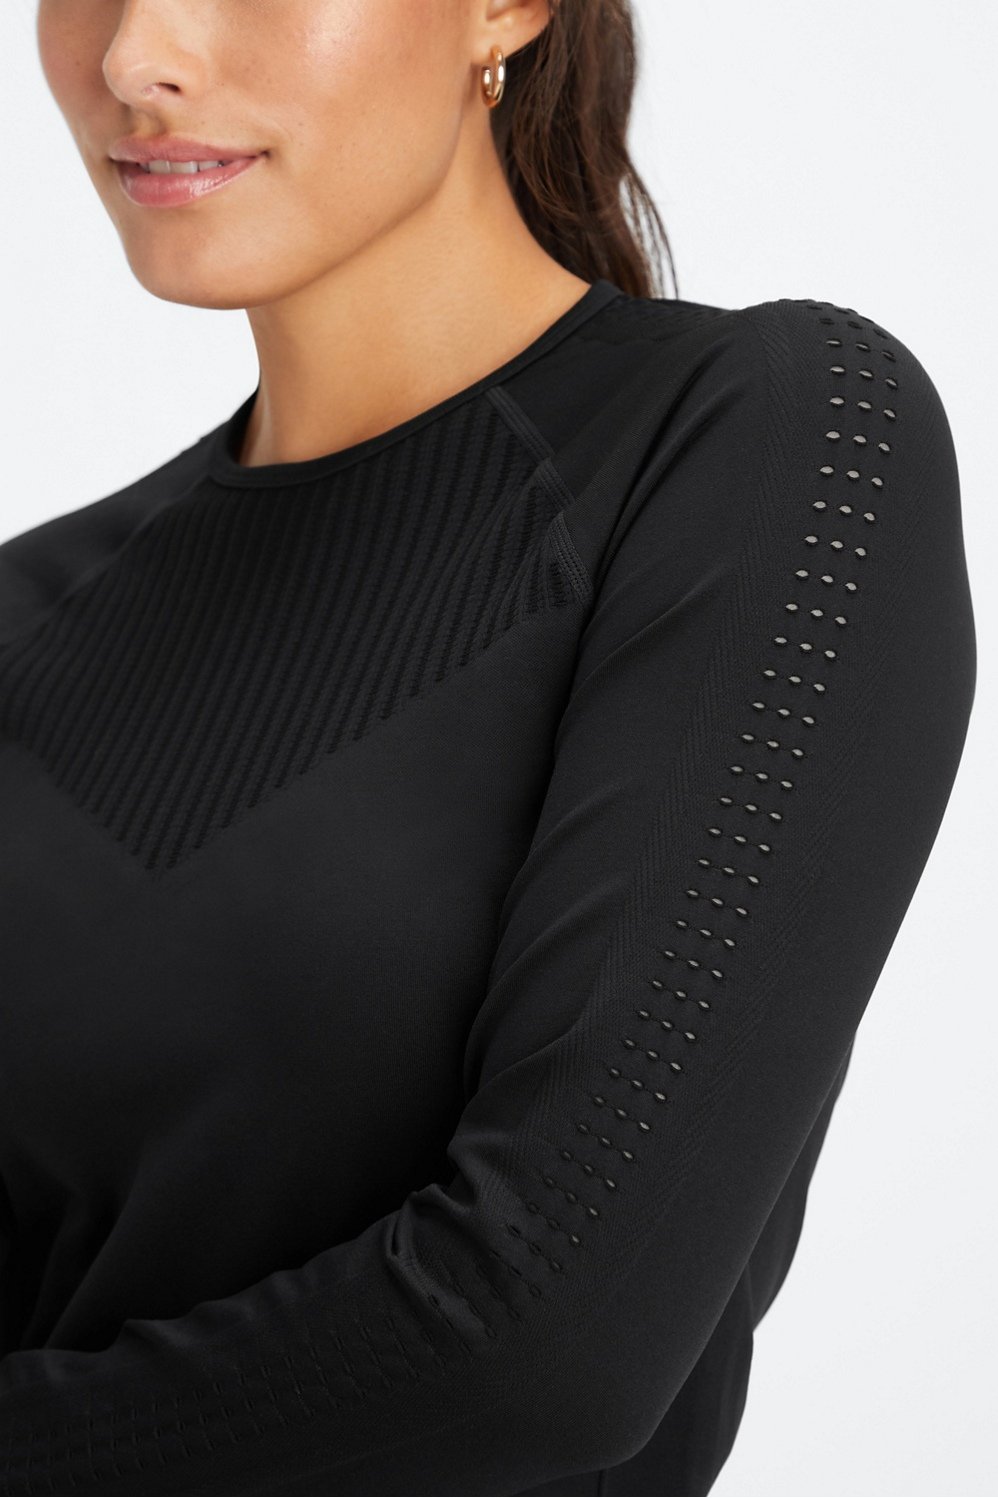 Sync - Fabletics Top Long-Sleeve Seamless